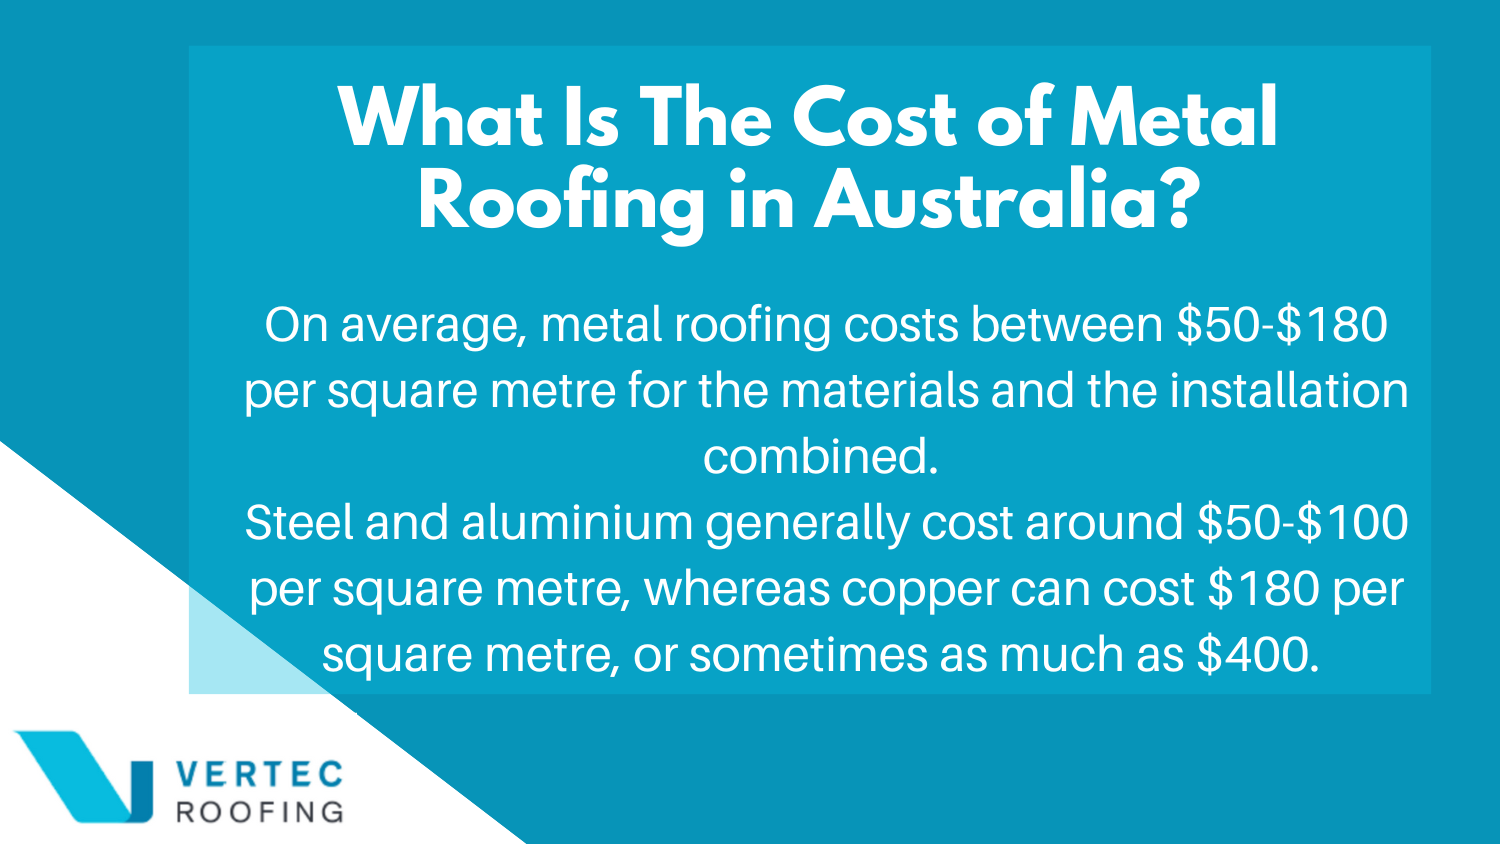 what is the cost of metal roofing in australia?